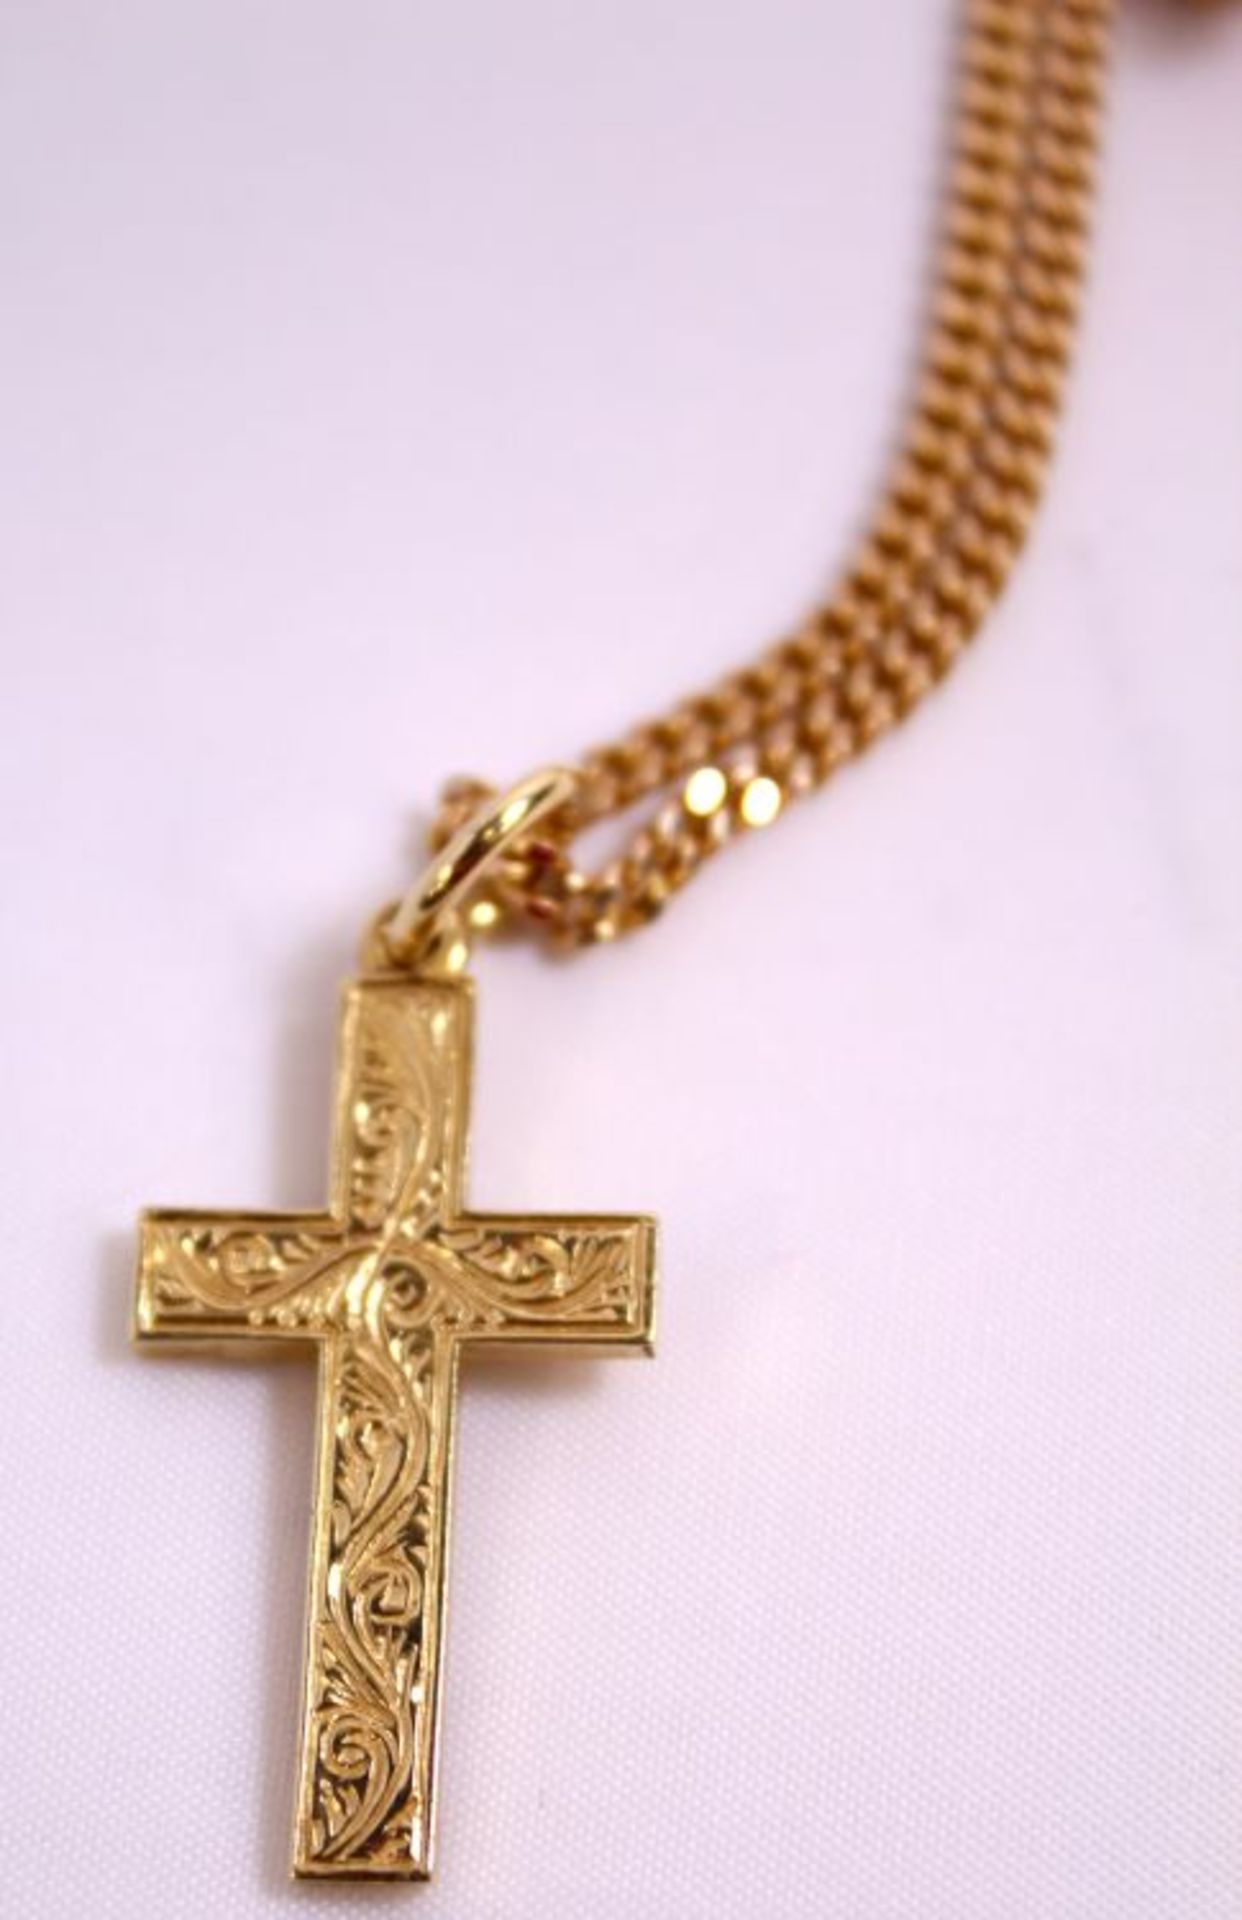 A 9ct Gold Chain with 9ct Cross Pendant 15.6g (Est. £180-£250) - Image 2 of 2